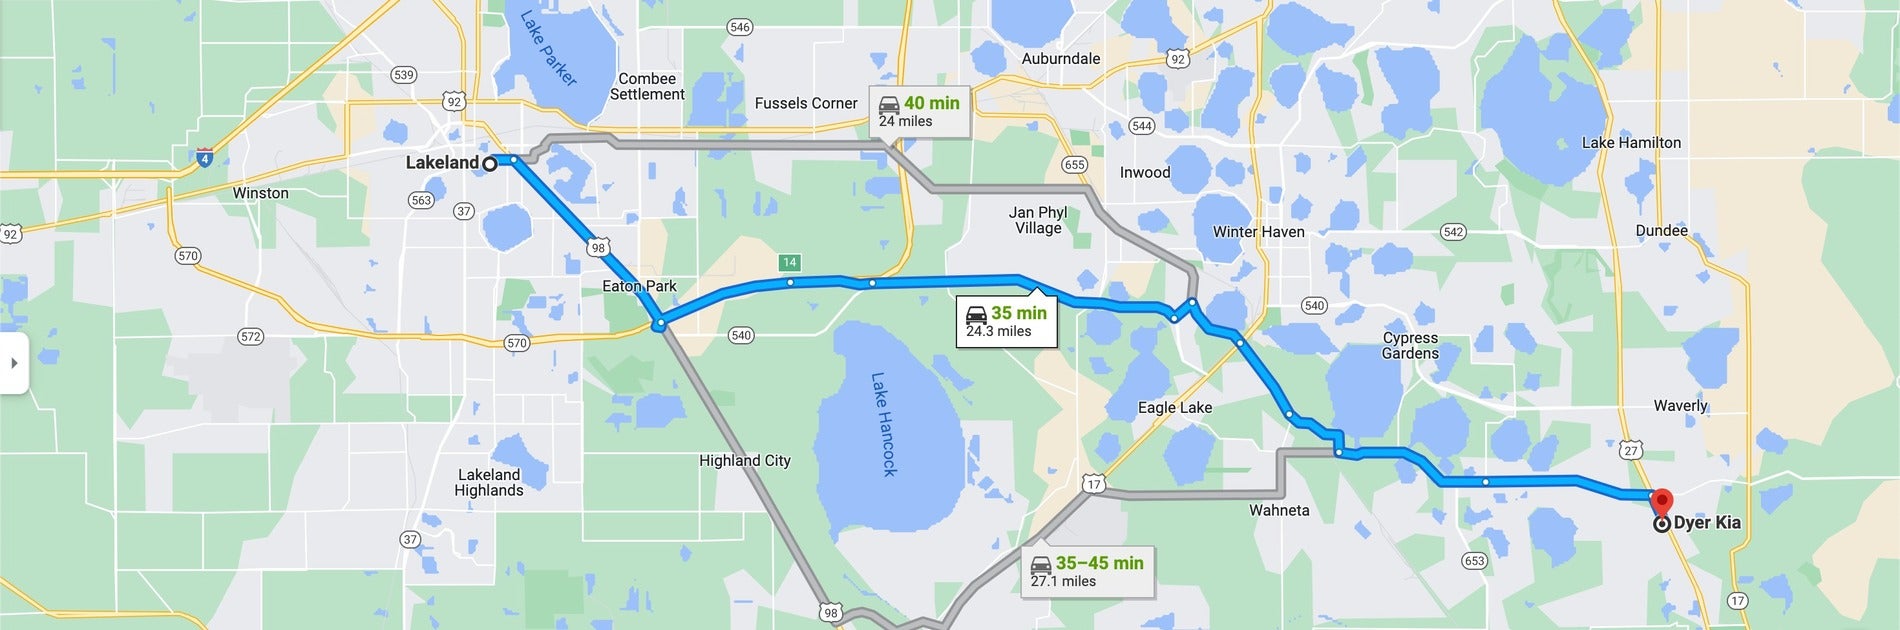 image of Google Map with directions from Lakeland, FL to Dyer Kia location